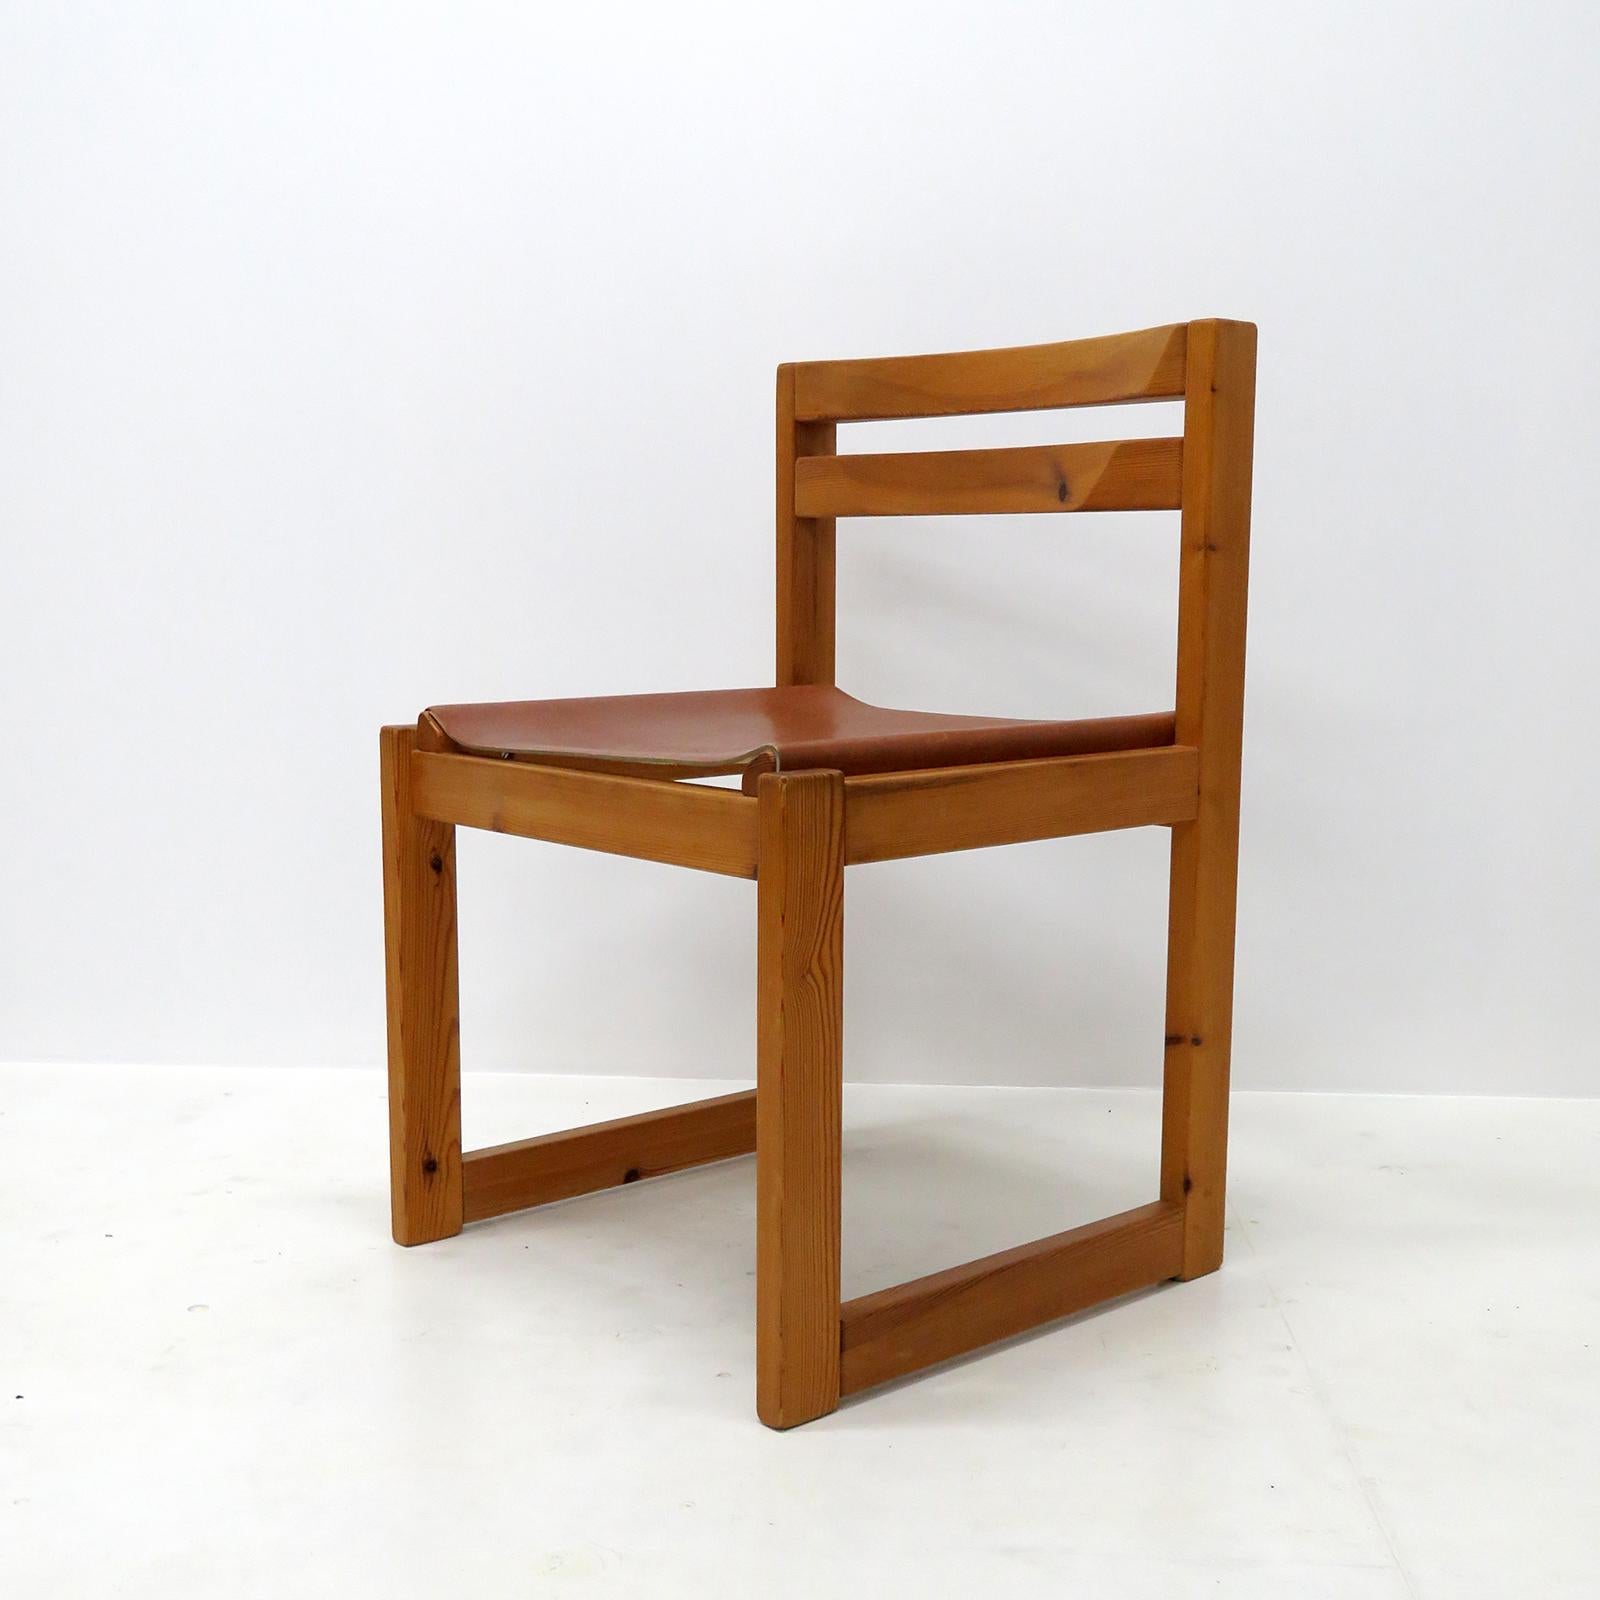 Scandinavian Modern Pine and Leather Dining Chair by Knud Færch for Sorø Stolefabrik, 1970 For Sale